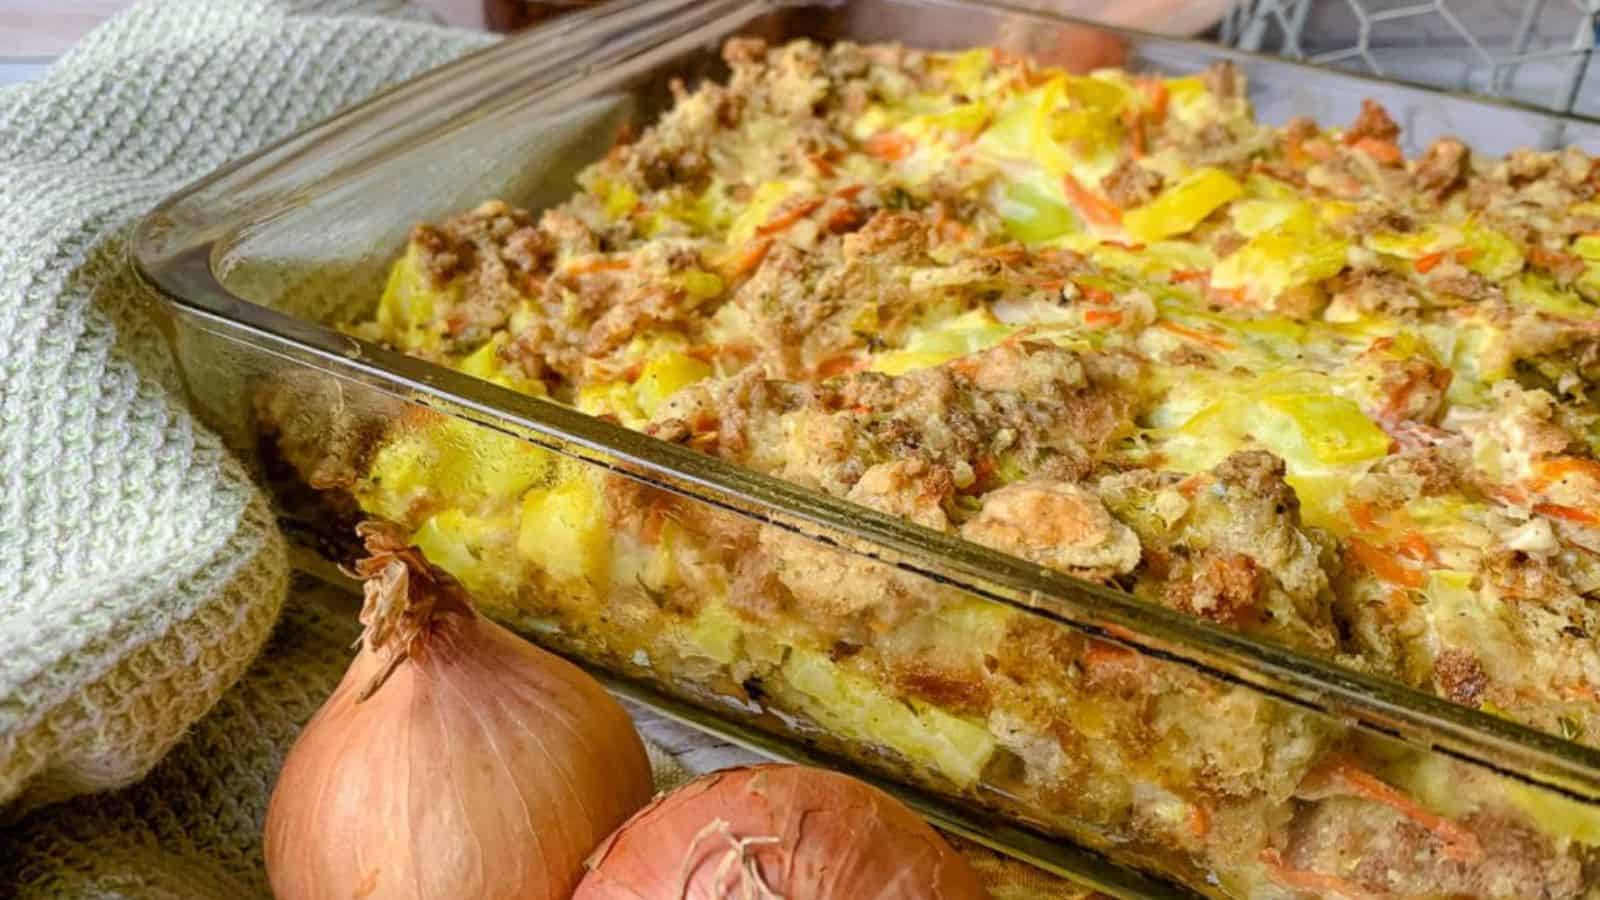 A glass baking dish filled with baked squash casserole.